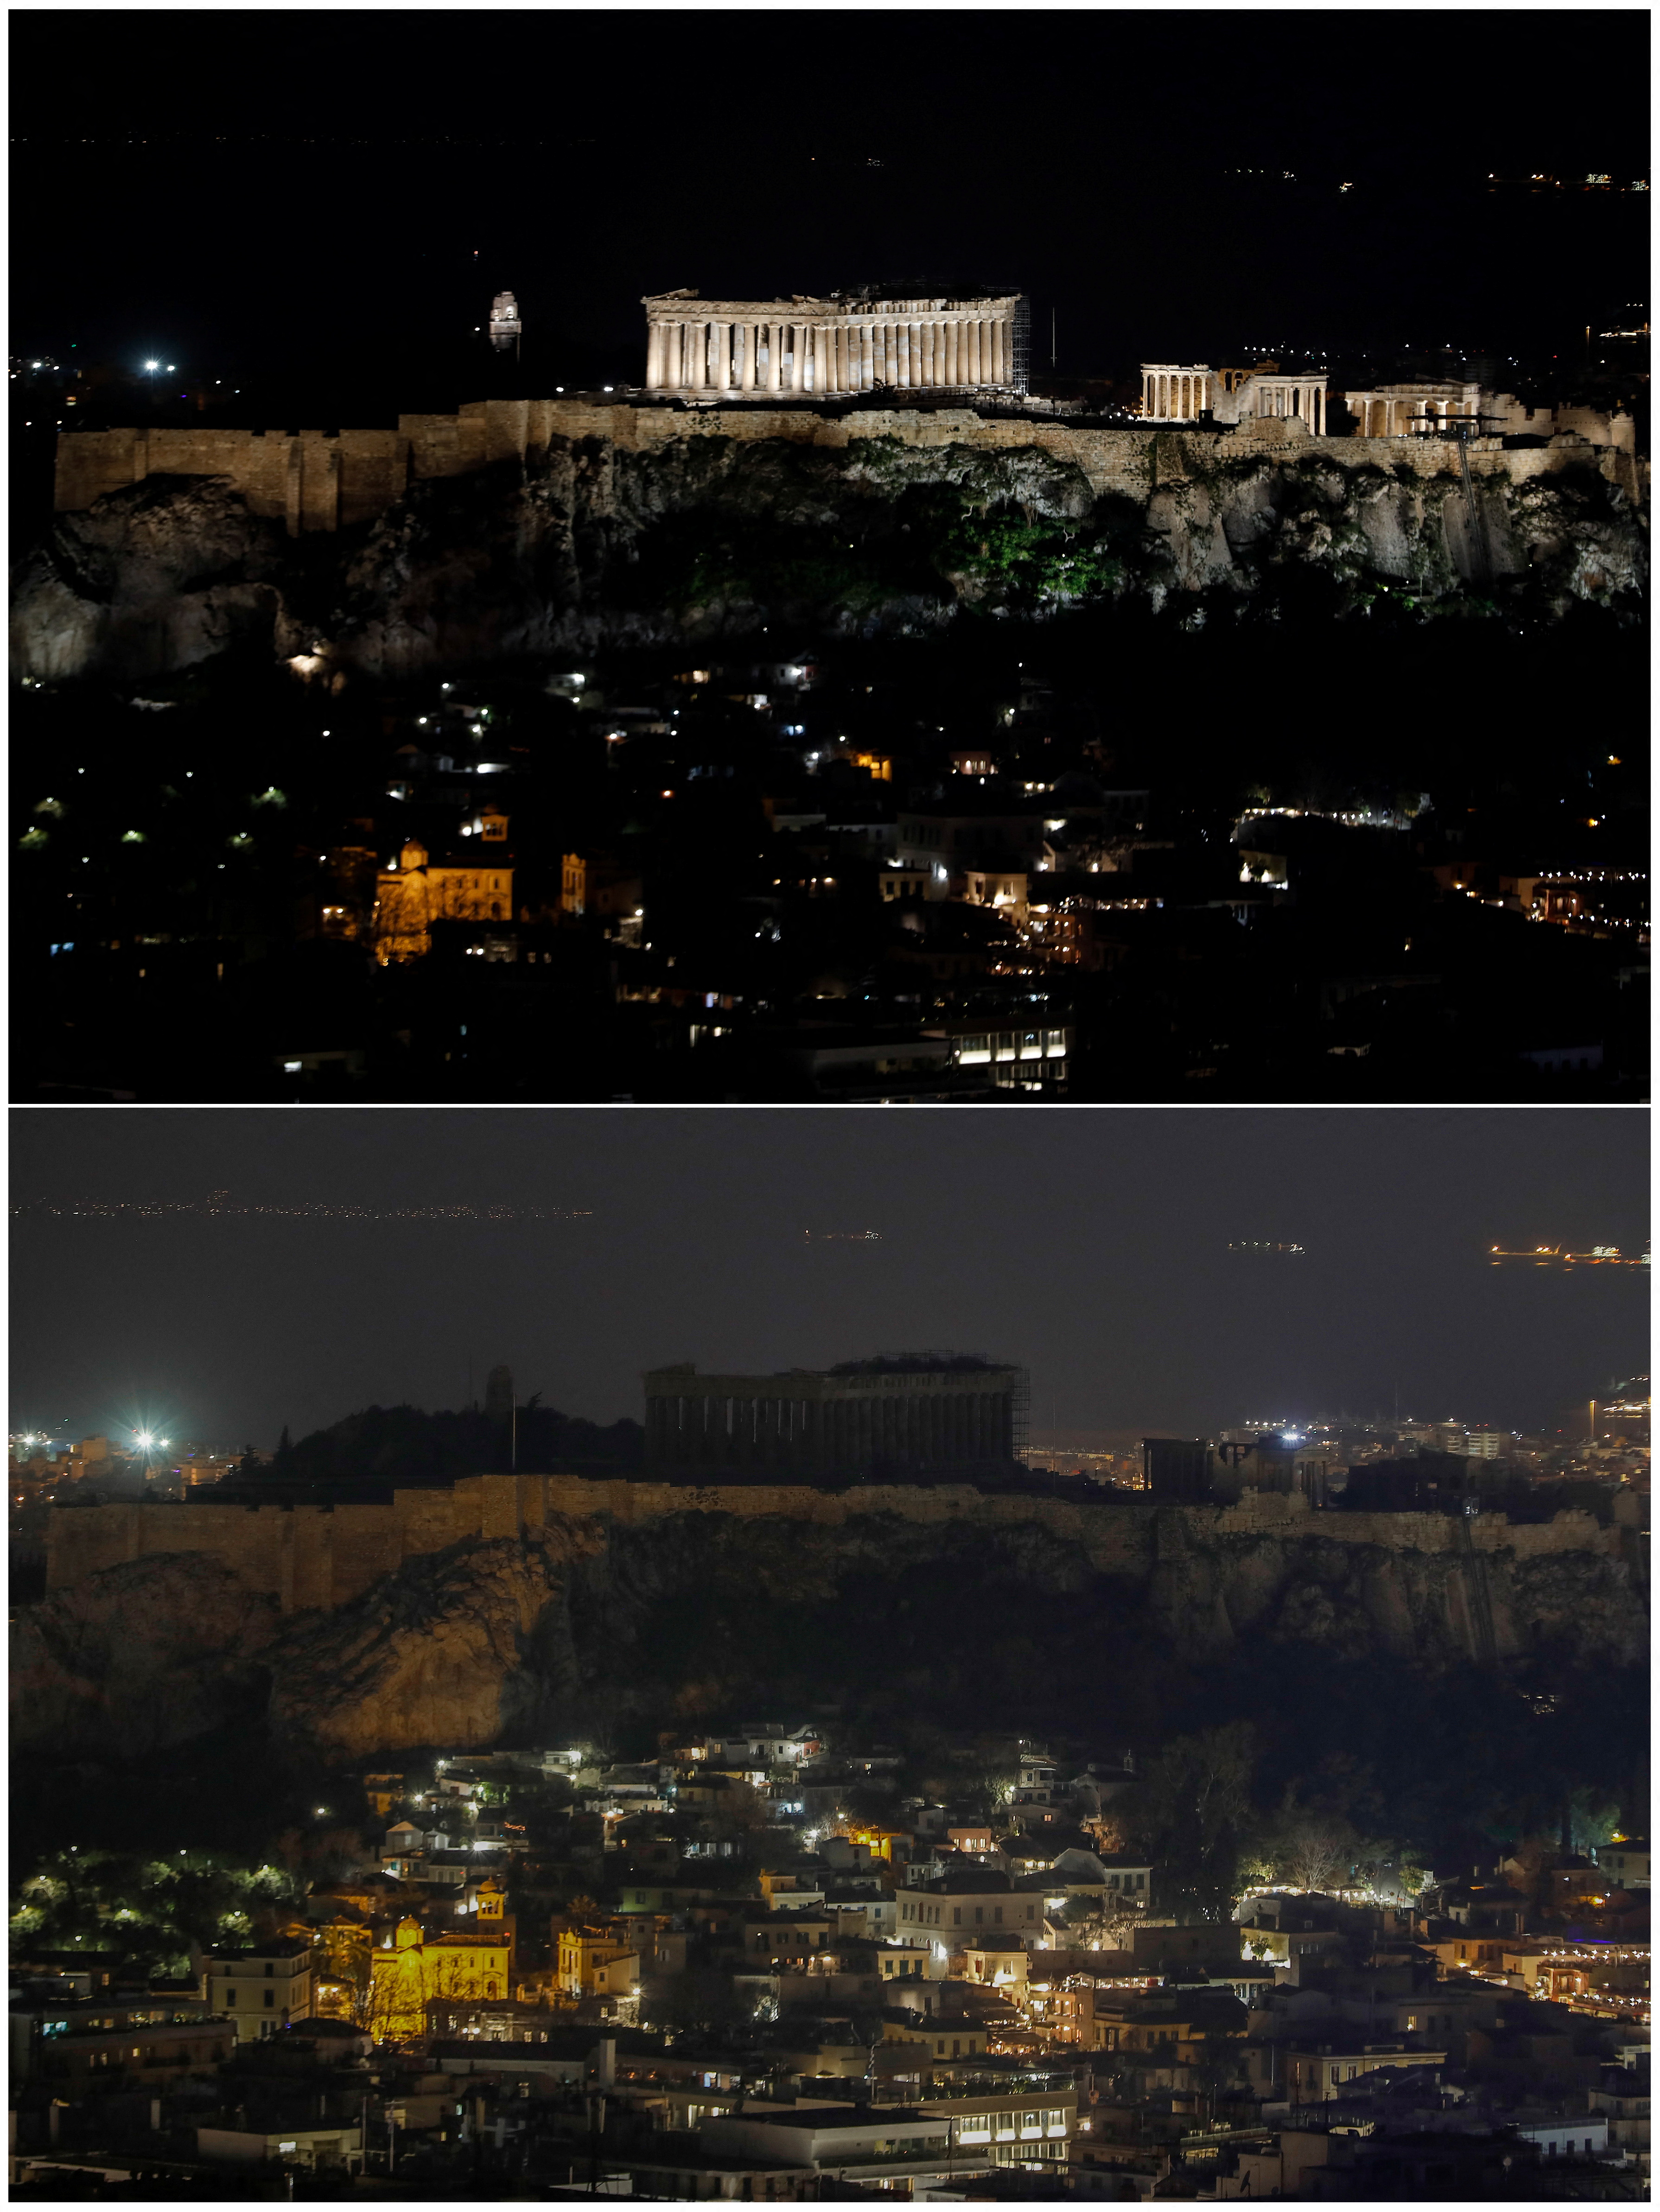 The Acropolis in Greece turned off its lights to educate Greeks about the importance of caring for the planet (Reuters / Costas Paltas)